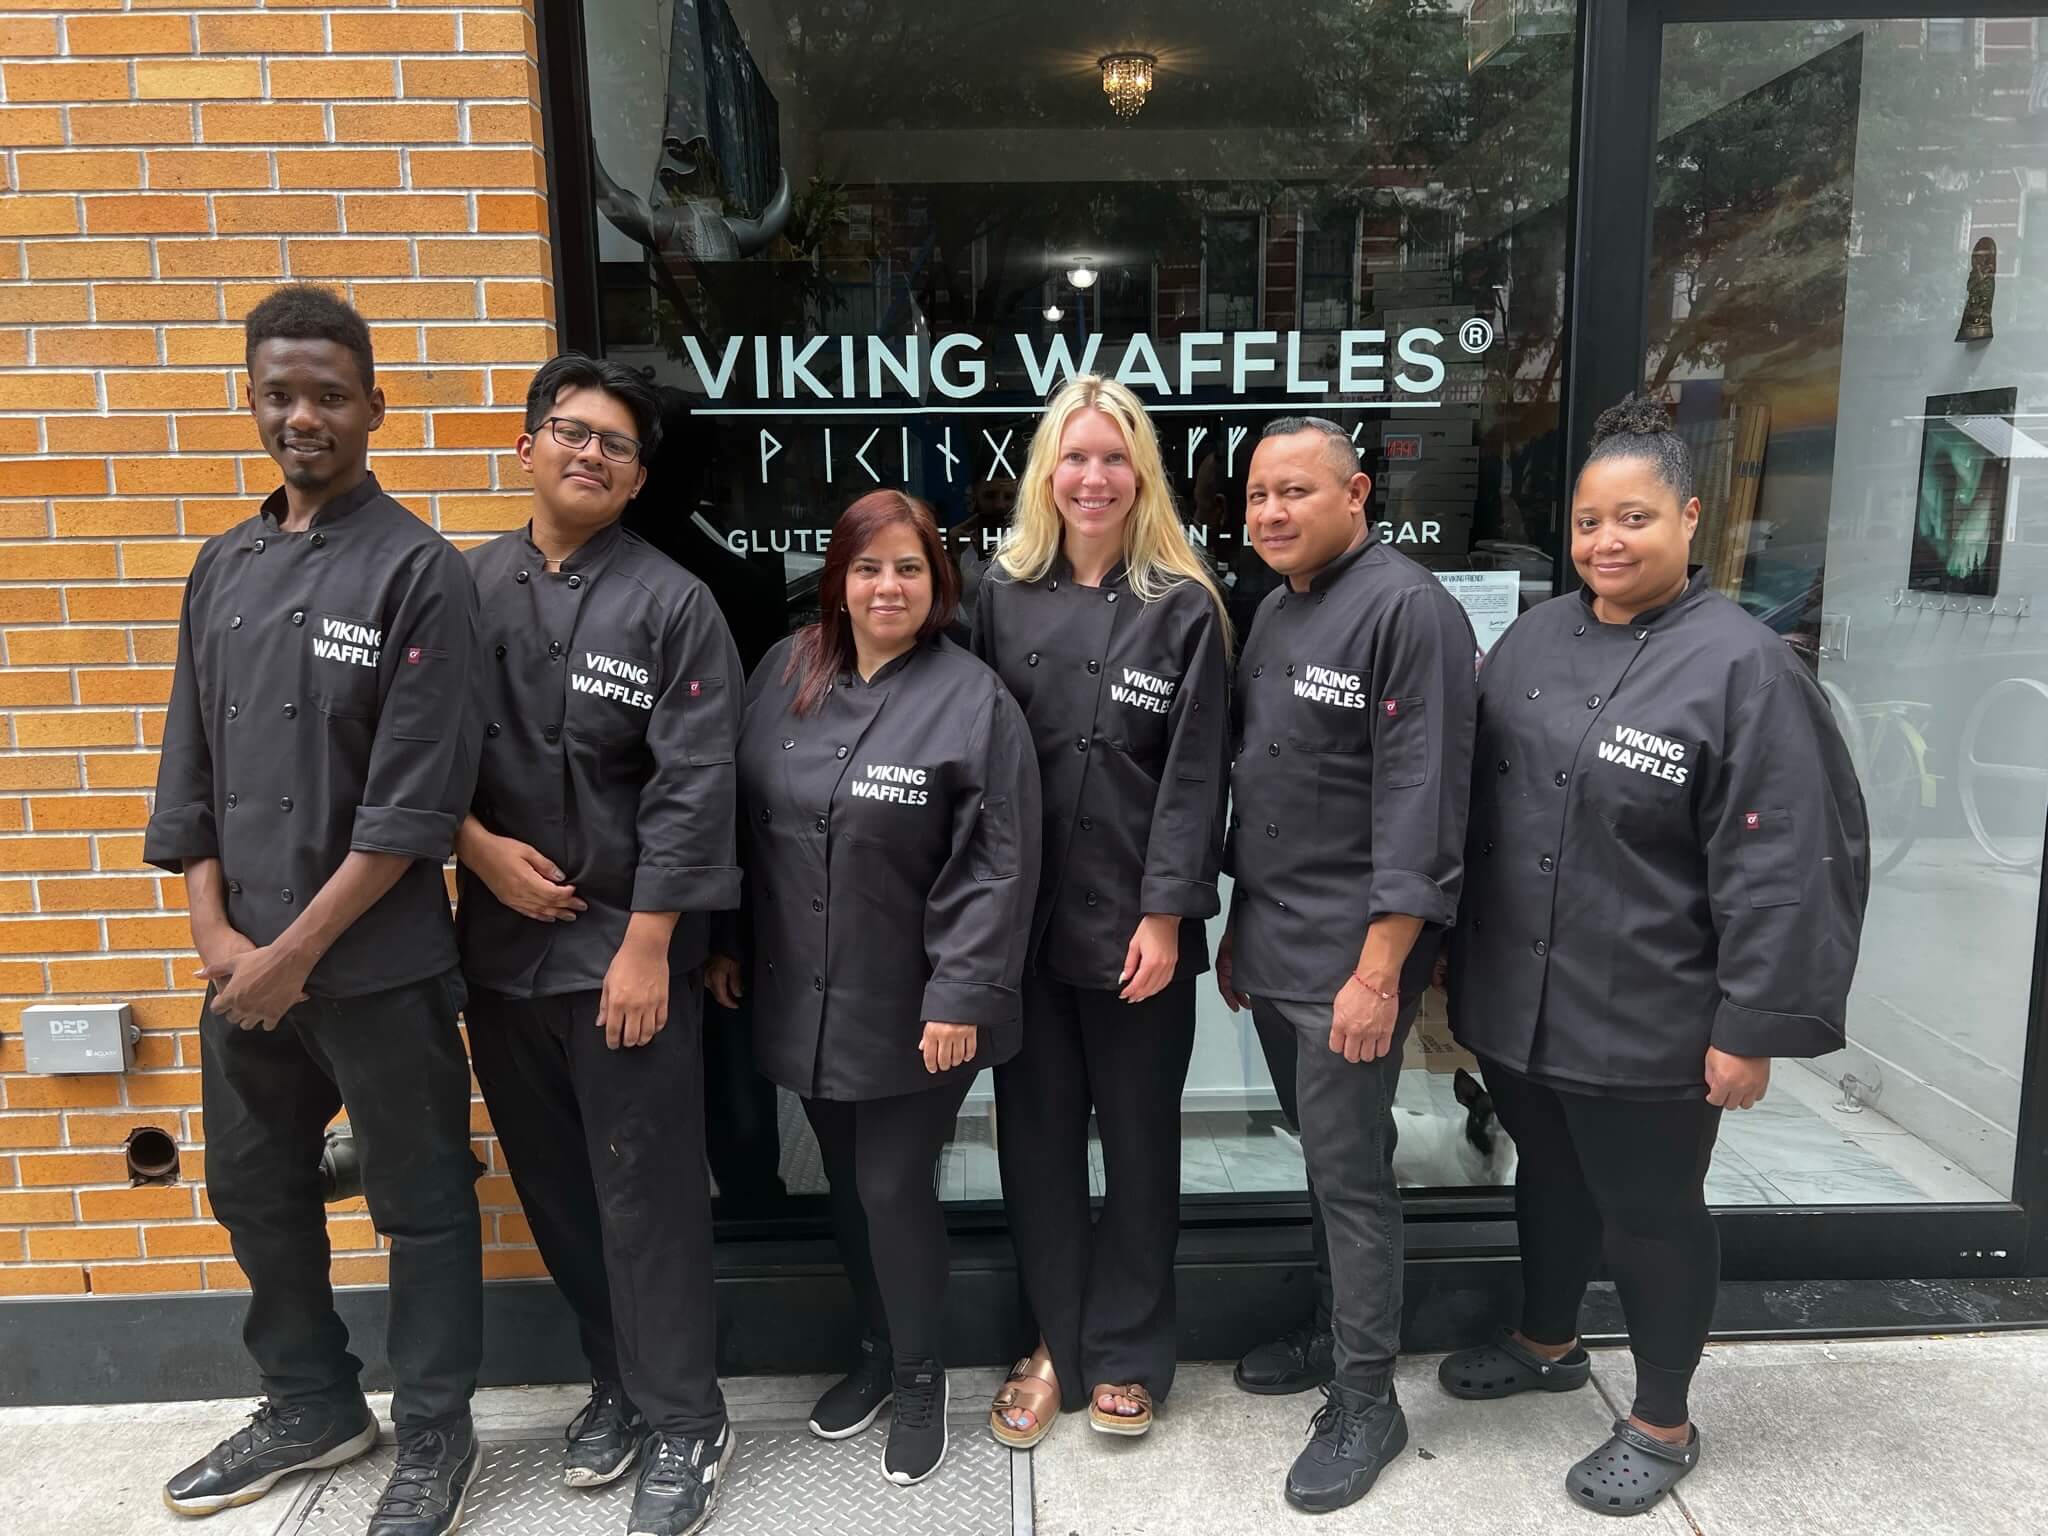 An image of 6 Viking Waffles employees standing in a line, smiling outside their bakery with “Viking Waffles” printed on the window. They are all dressed in black pants and black chef jackets, with the brand logo printed on them. The founder, Benedicte Engen is a tall blonde woman and is standing in the middle. 